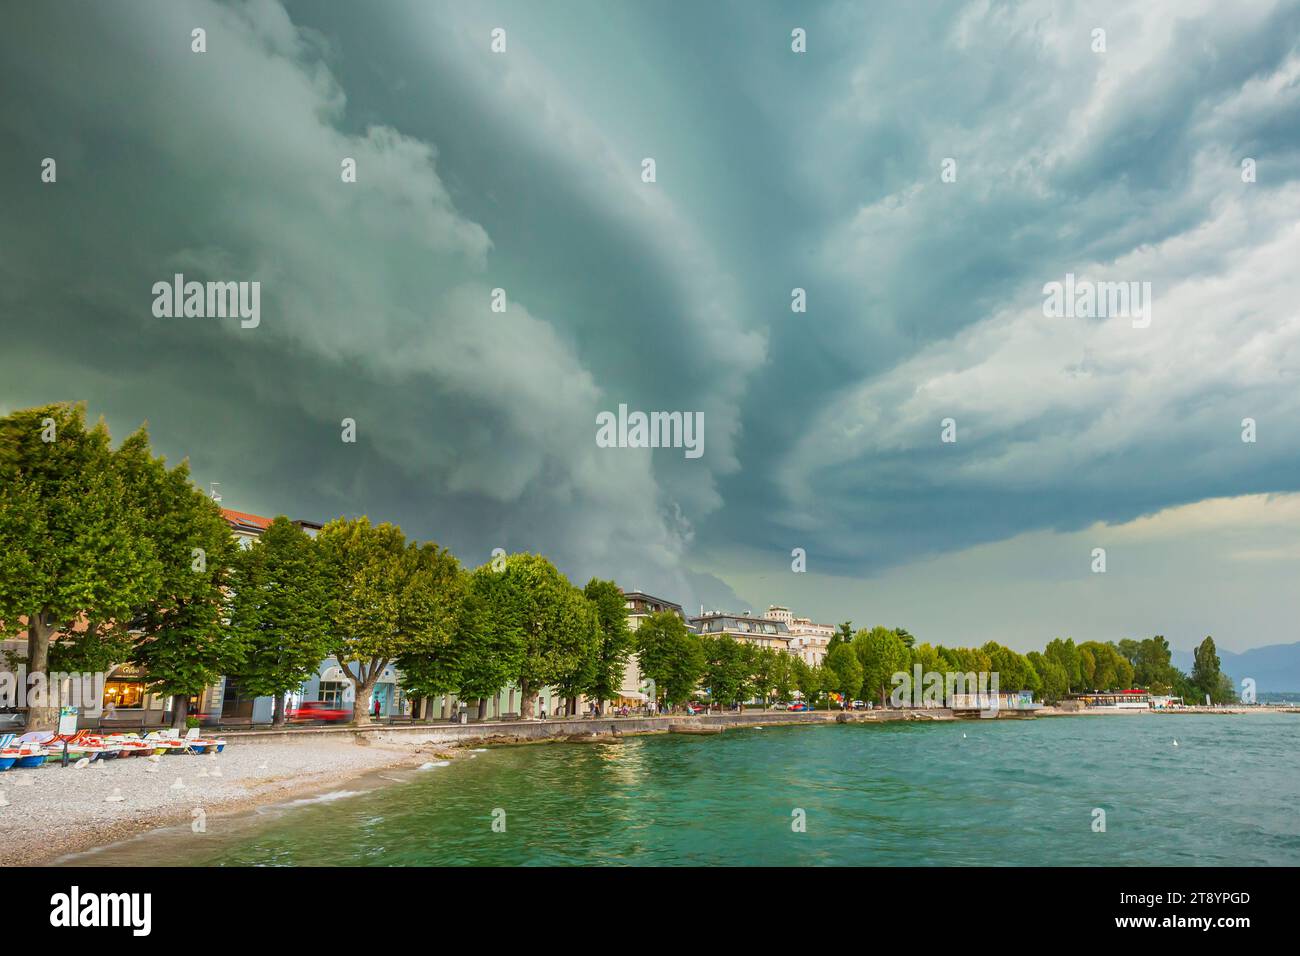 August 12 2019, Desenzano del Garda, Lombardy, Italy - Severe weather with thunderstorms, heavy rain showers and strong winds develop rapidly at Desen Stock Photo